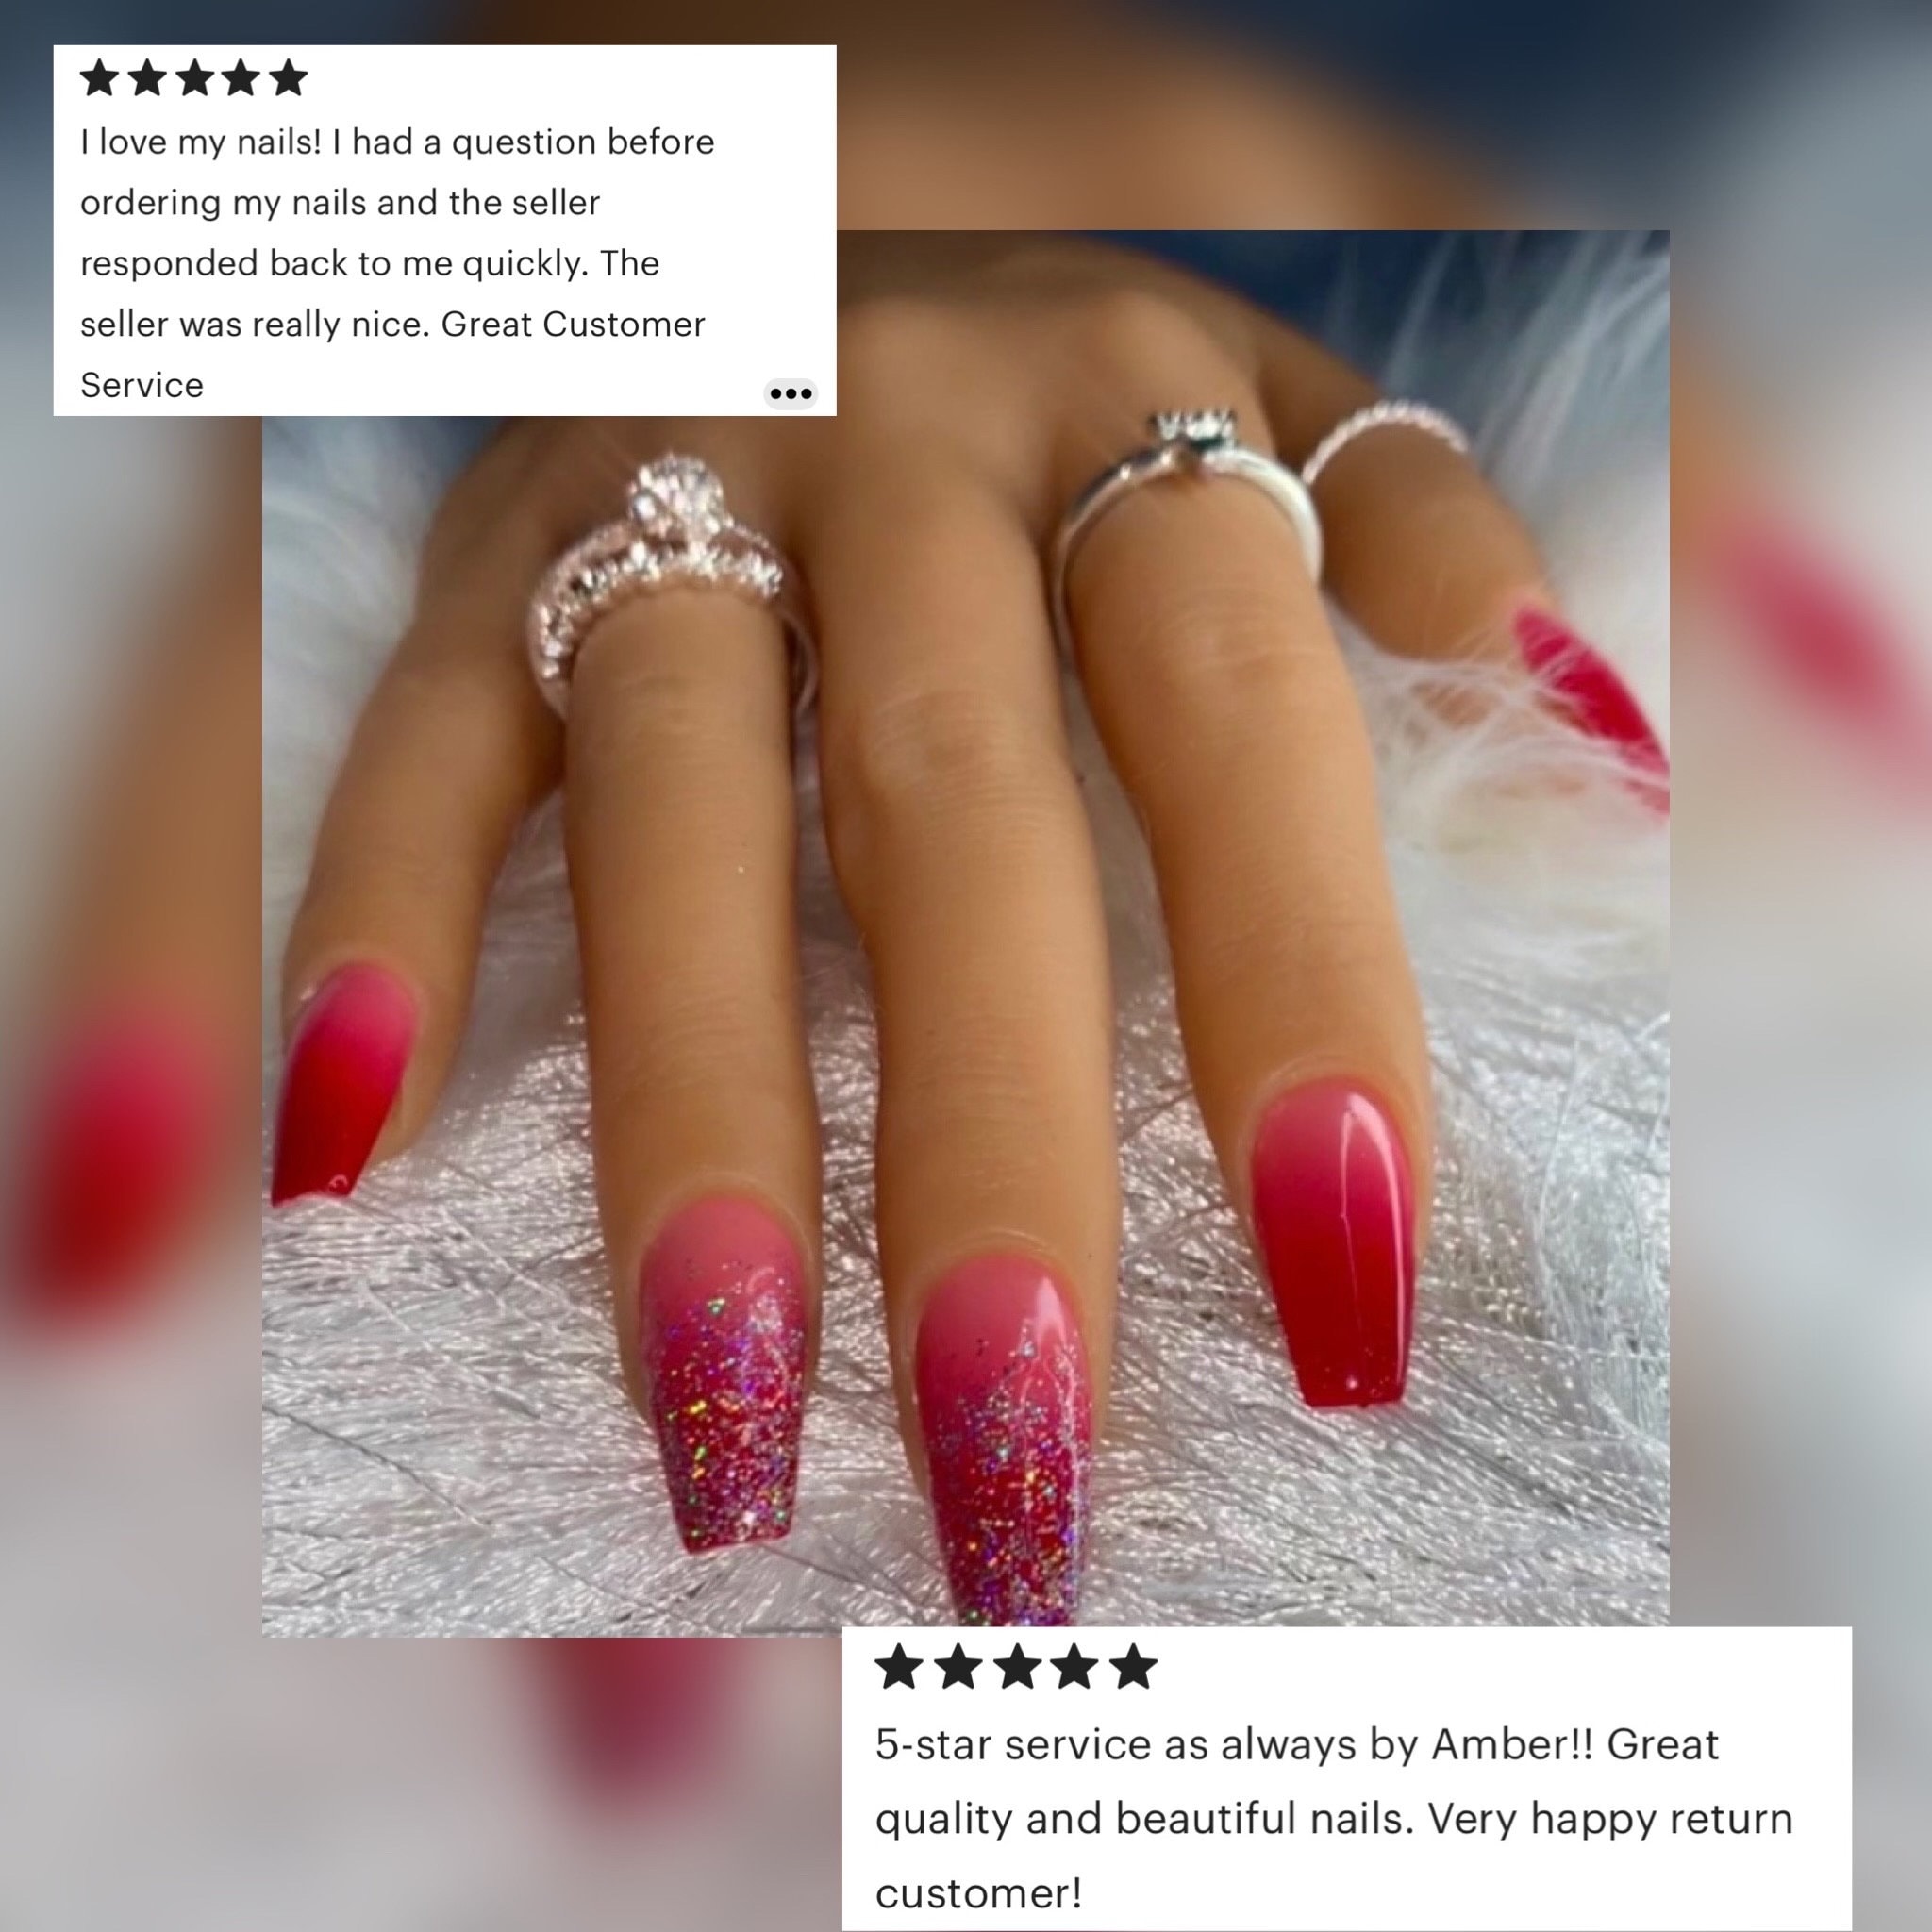 These acrylic nails are really cute & fun, Coffin nails, Summer nails